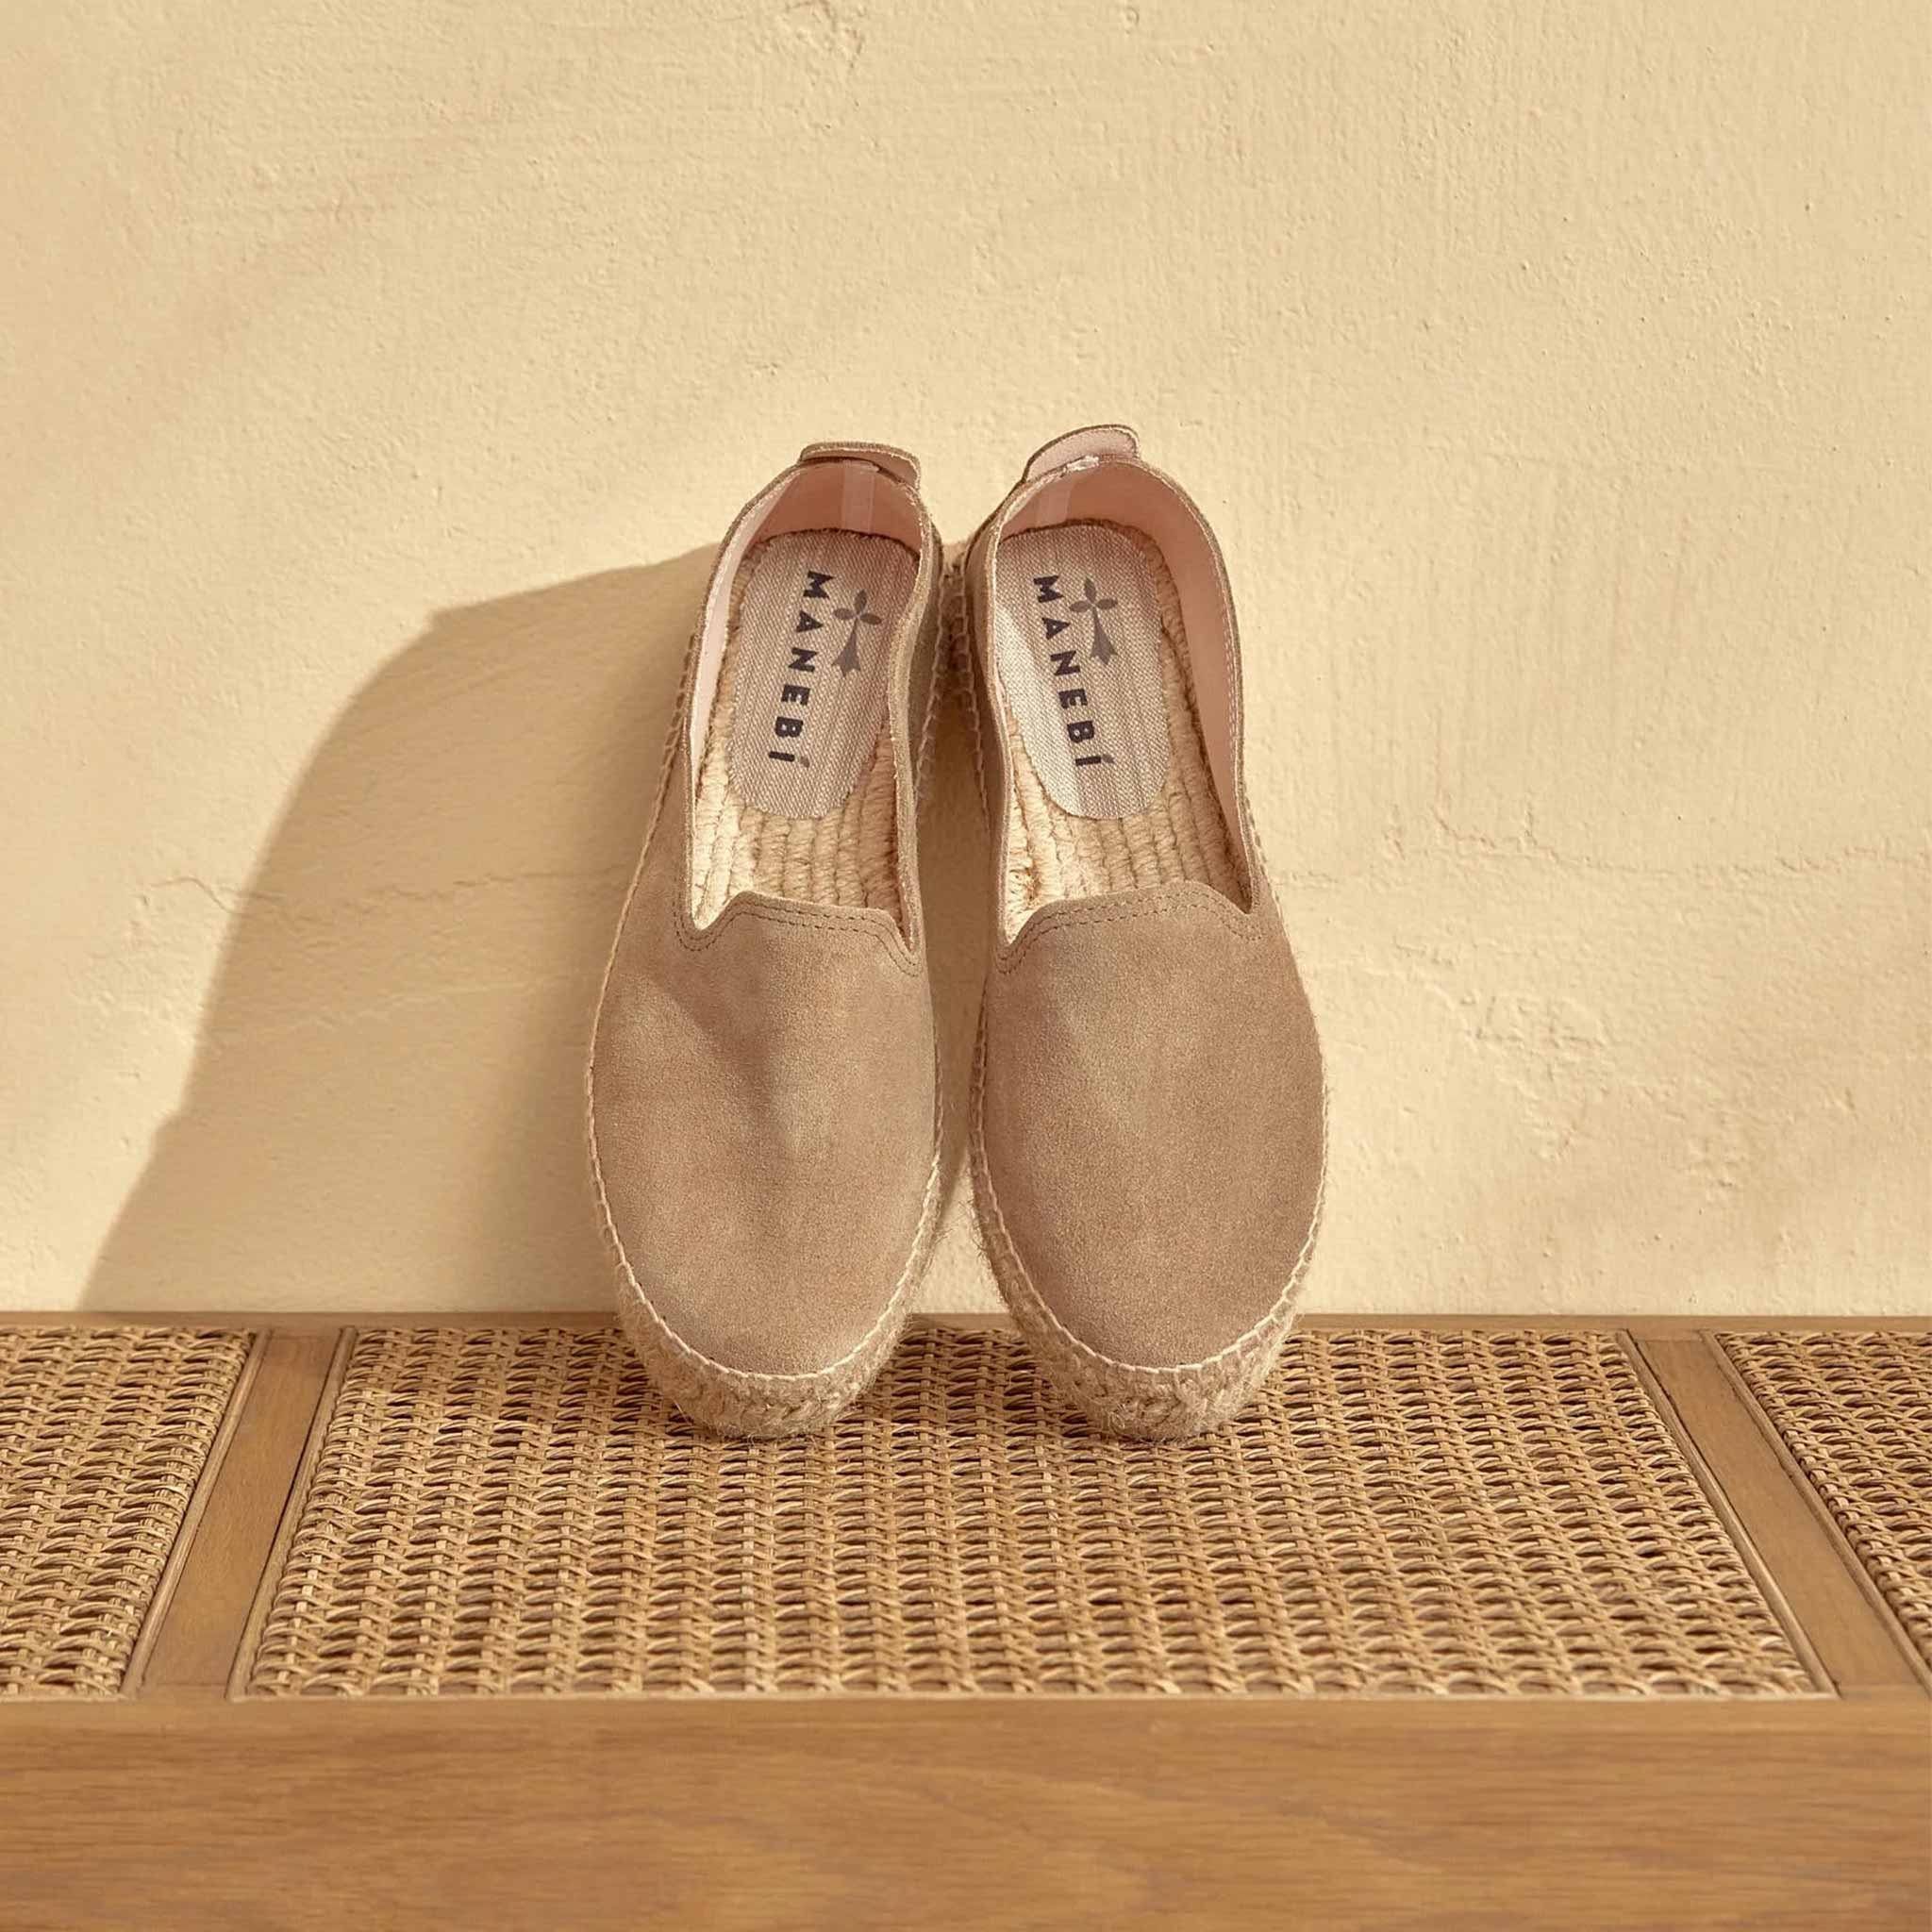 Double Sole Espadrilles in Suede Taupe